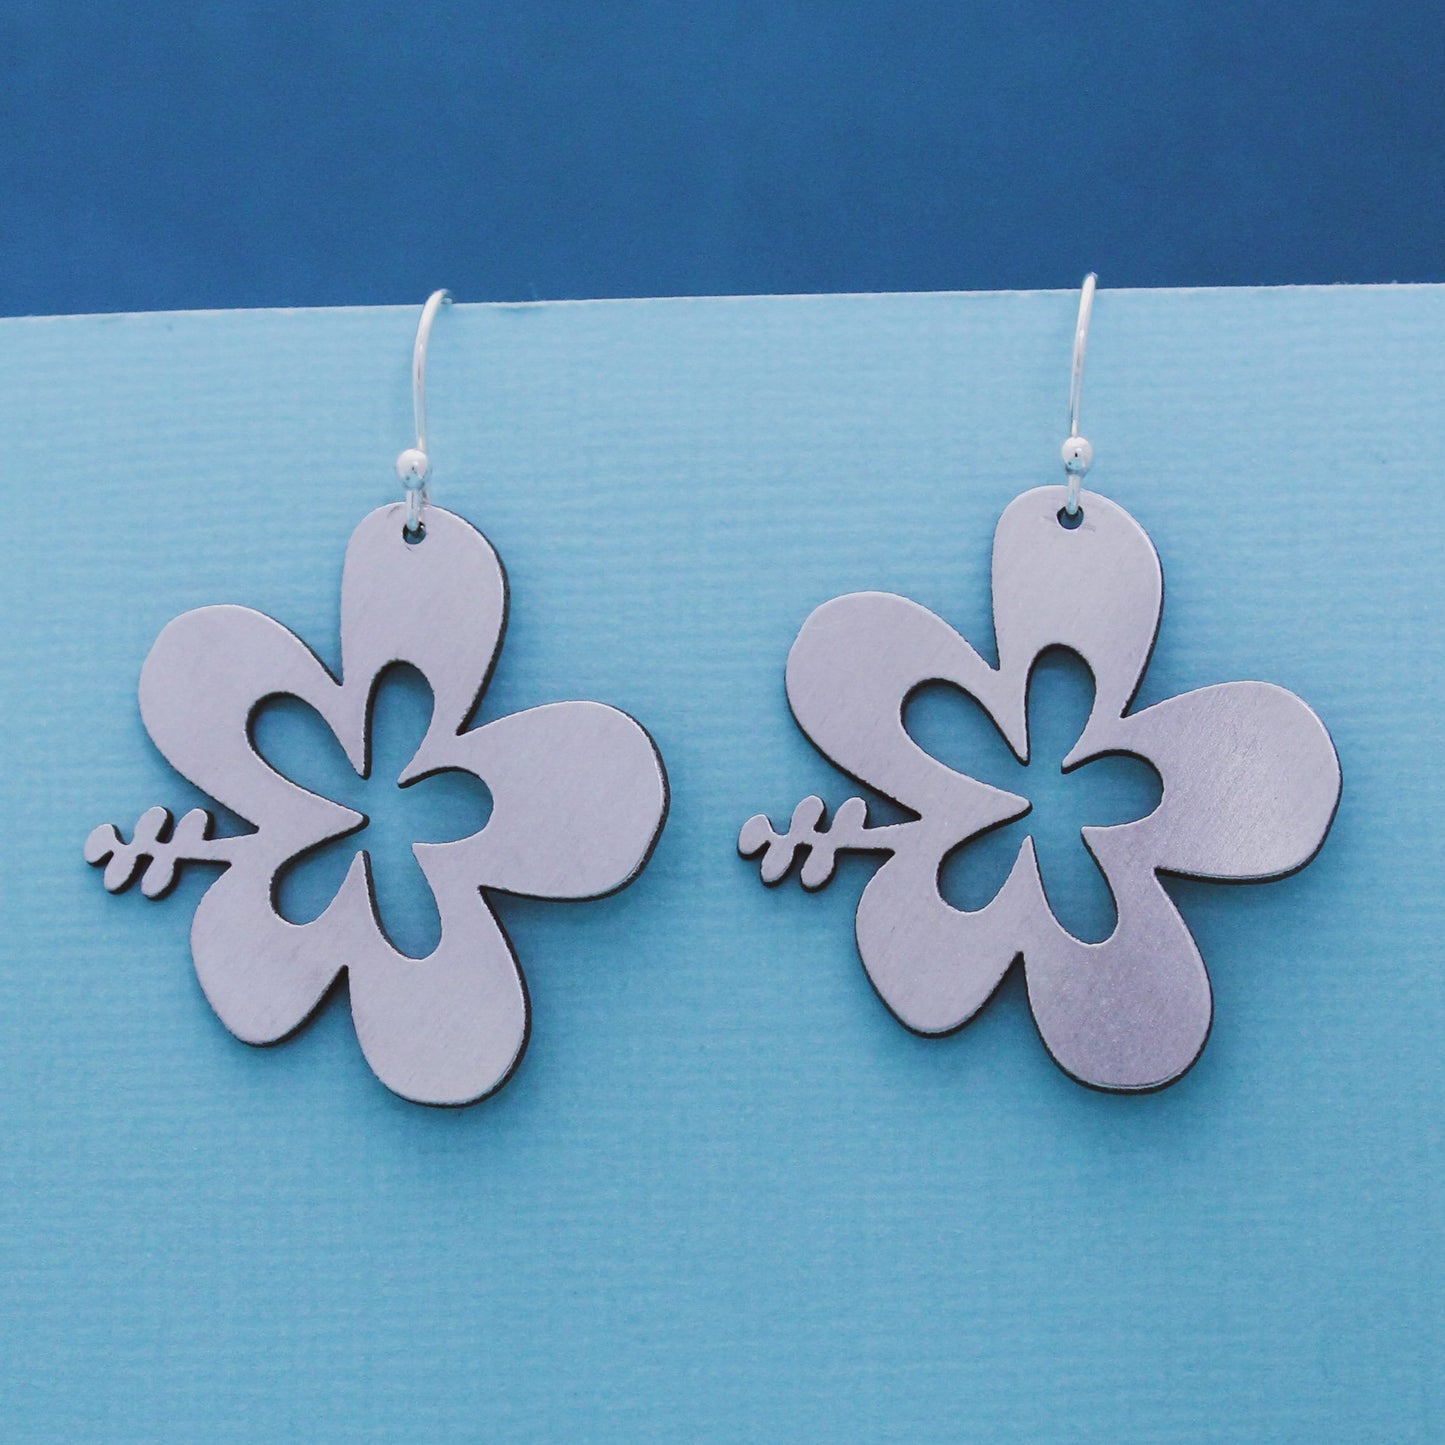 Cute Tropical Flower Earrings, Aluminum Hibiscus Flower Earrings, Cute Flower Jewelry, Plumeria Earrings, Mother's Day Gift, Gifts for Her